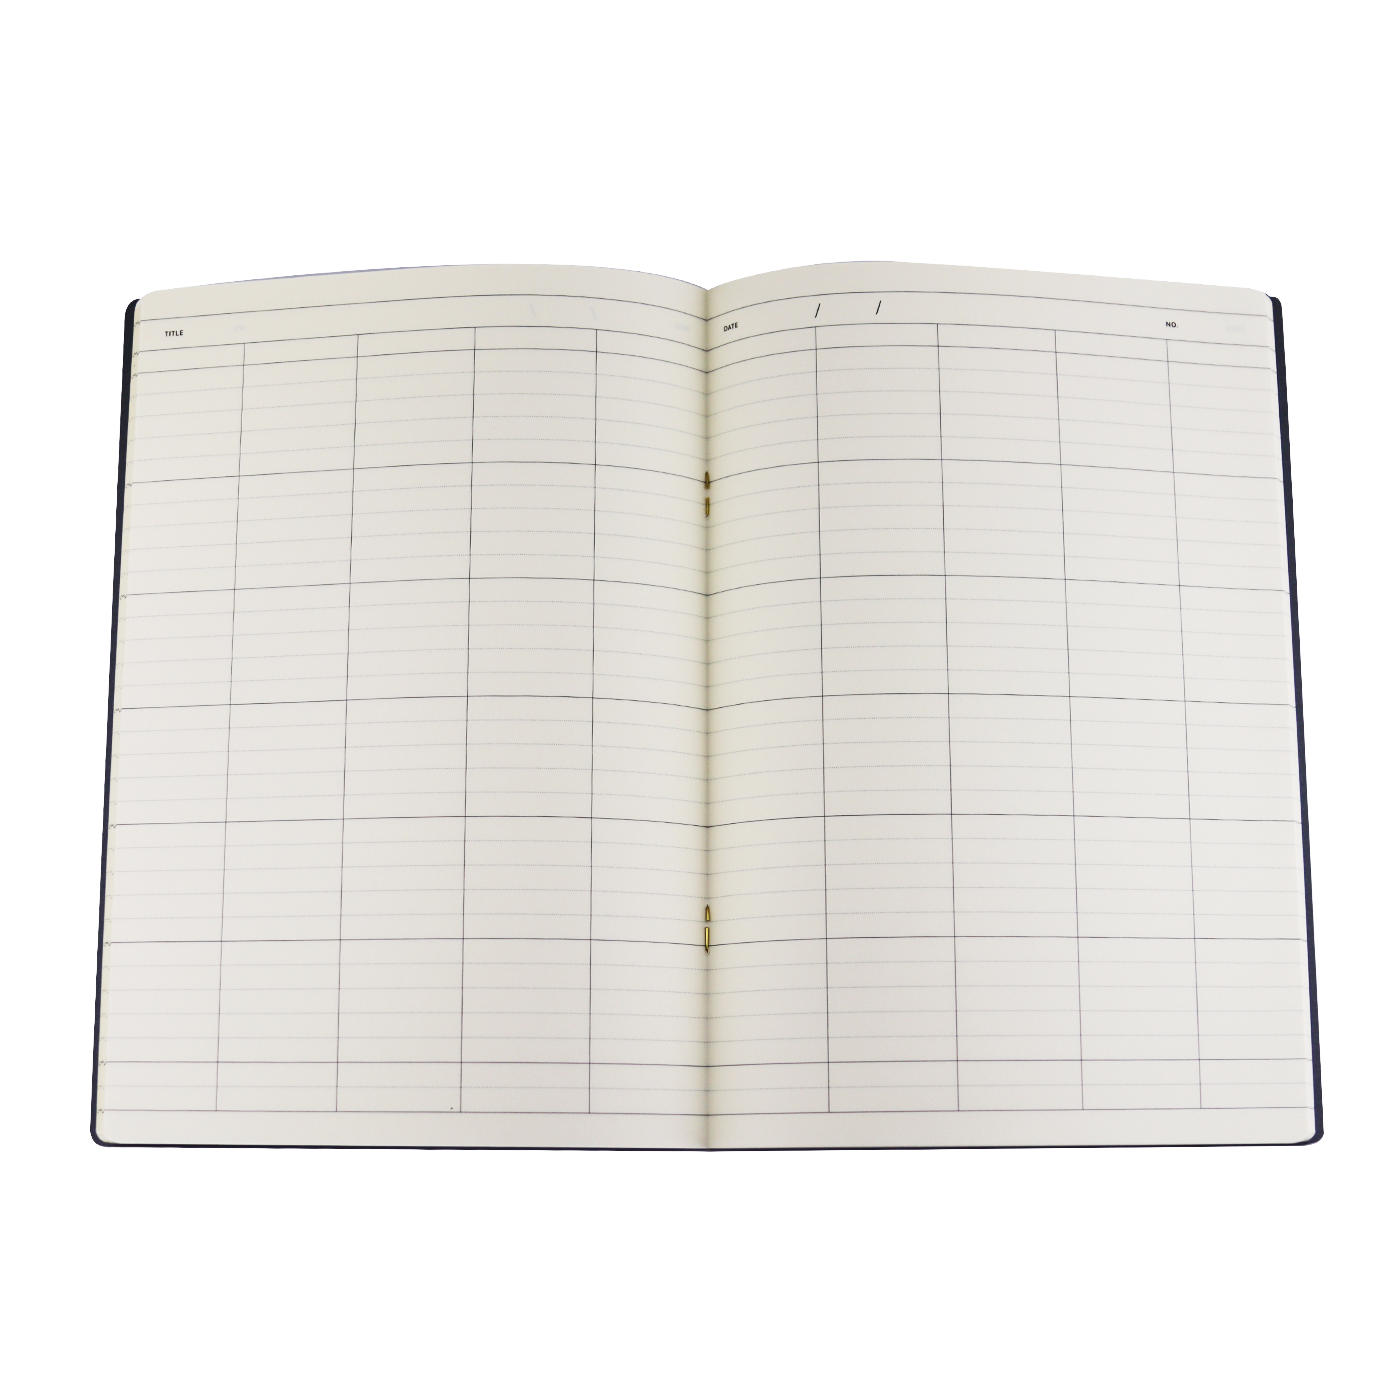 Laconic style Notebook A5 - Spreadsheet